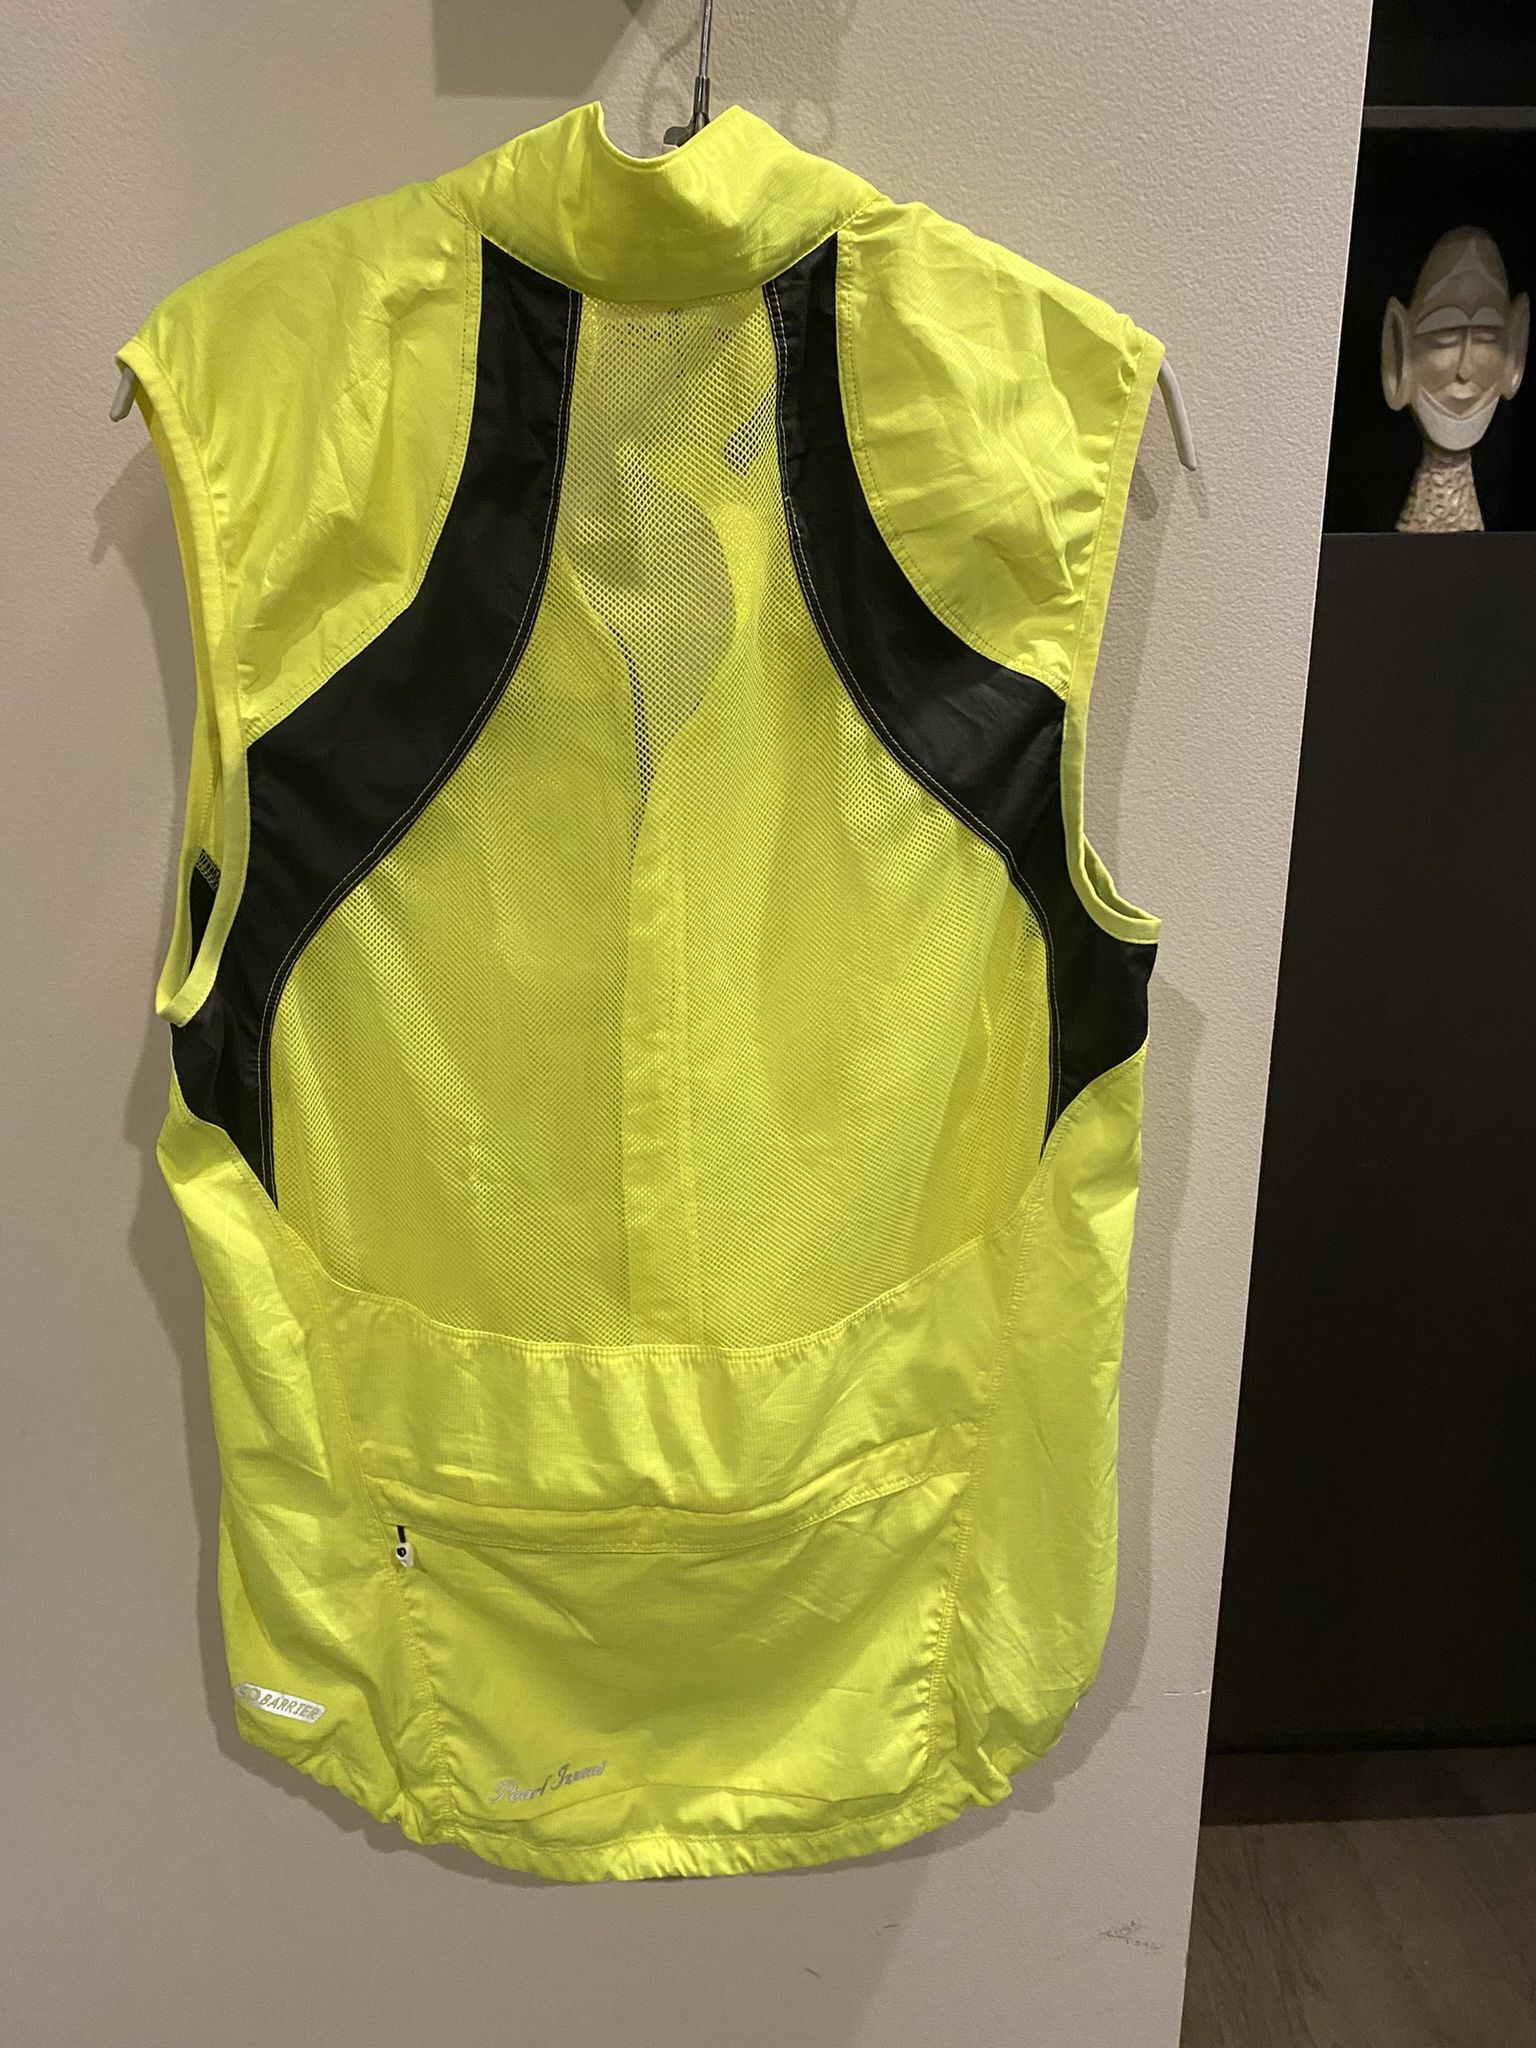 Pearl Izumi Womens Elite Barrier Vest With Open Mesh Rear Panel For Ventilation, Size L